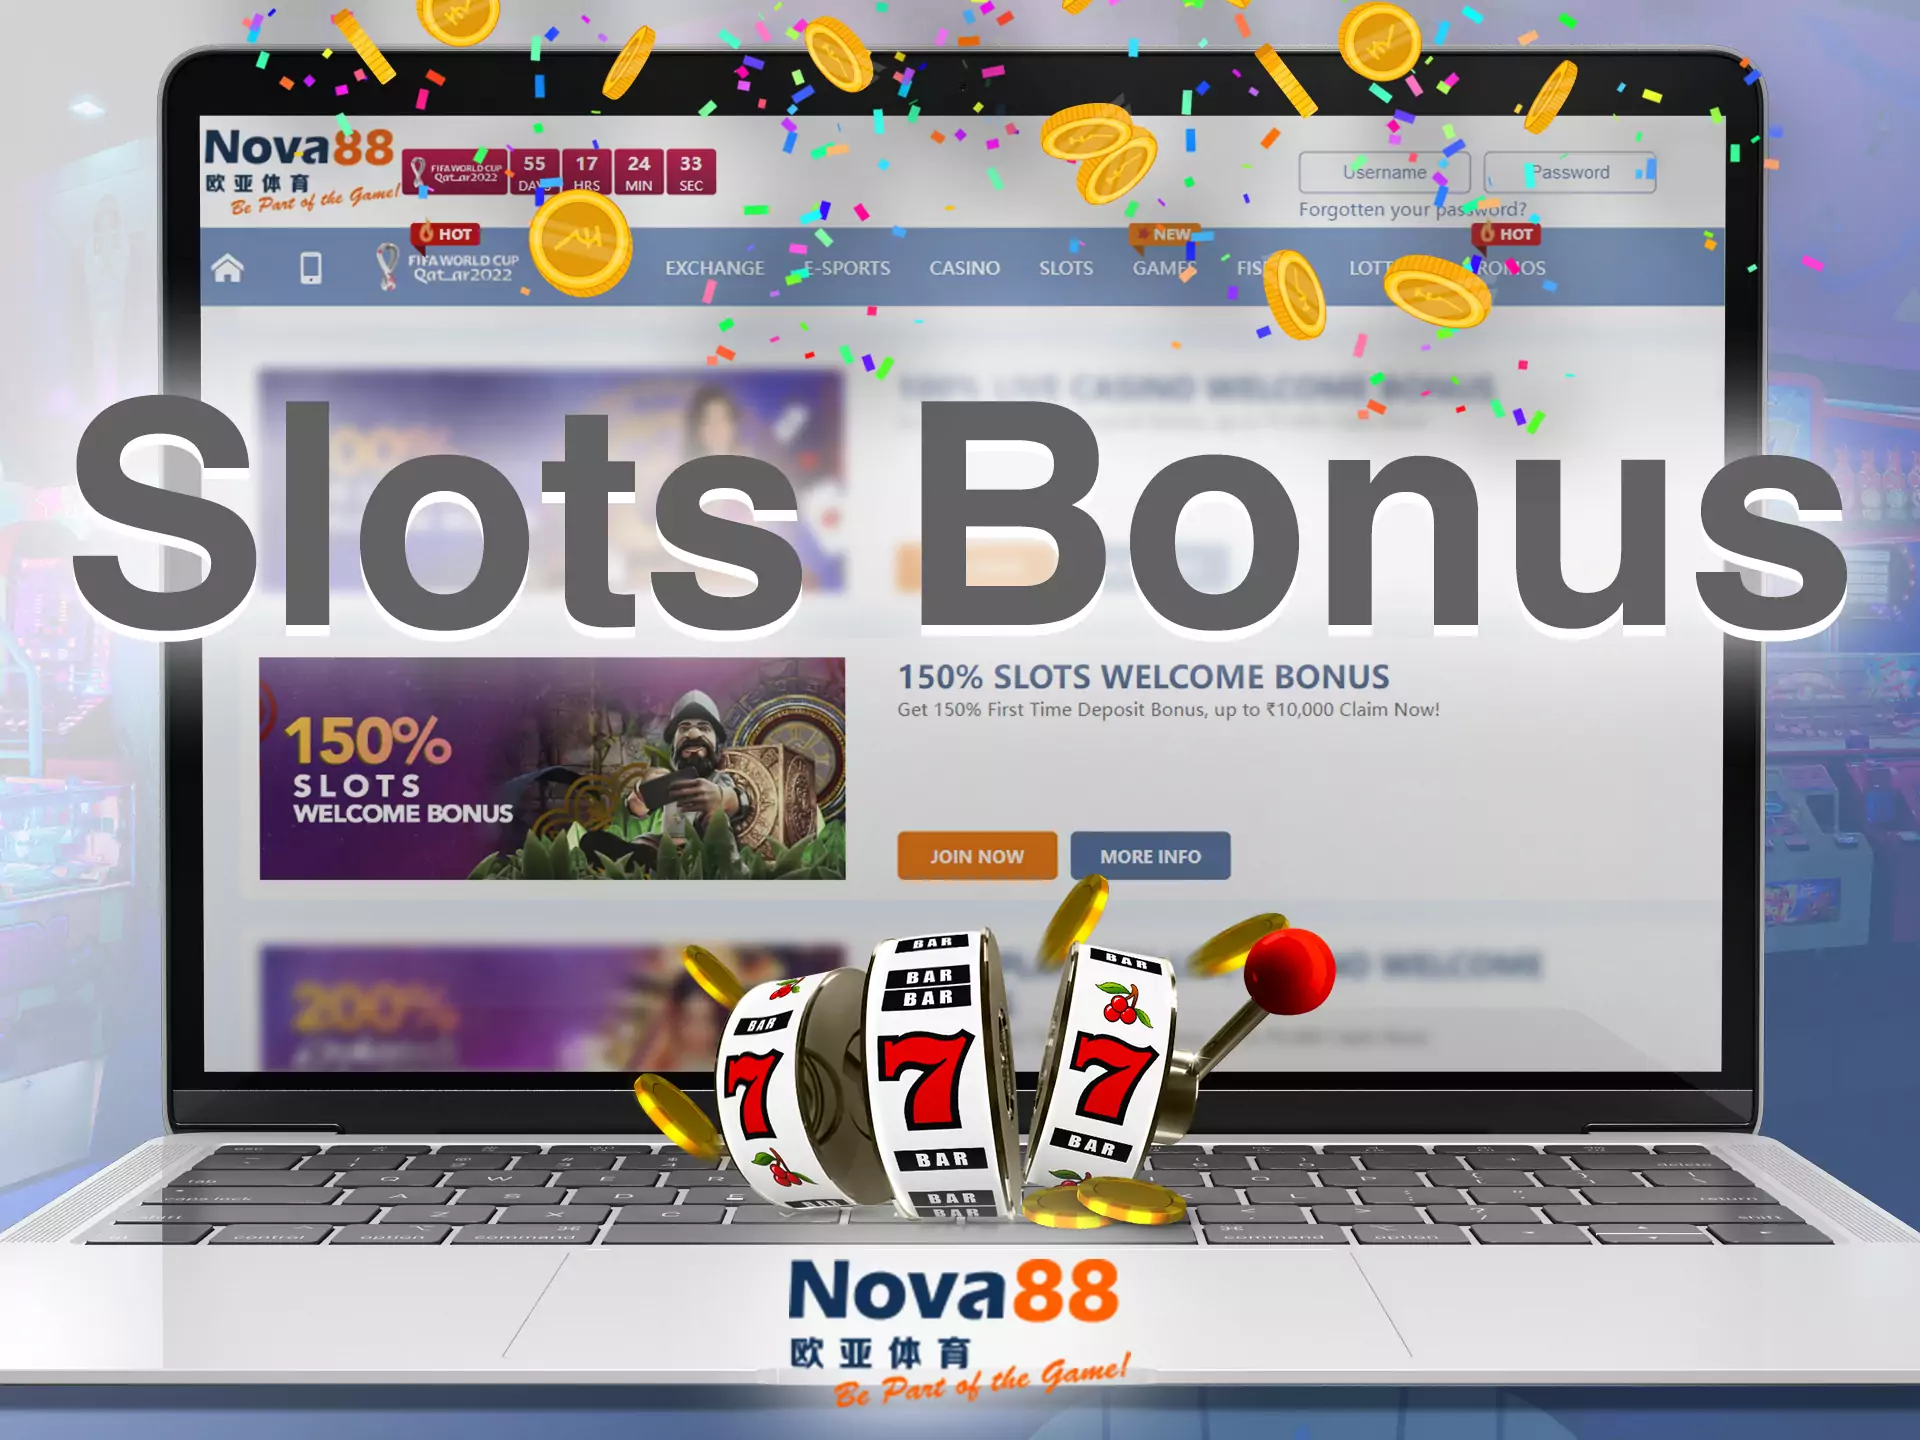 New users of Nova88 can get a welcome bonus for playing slots.